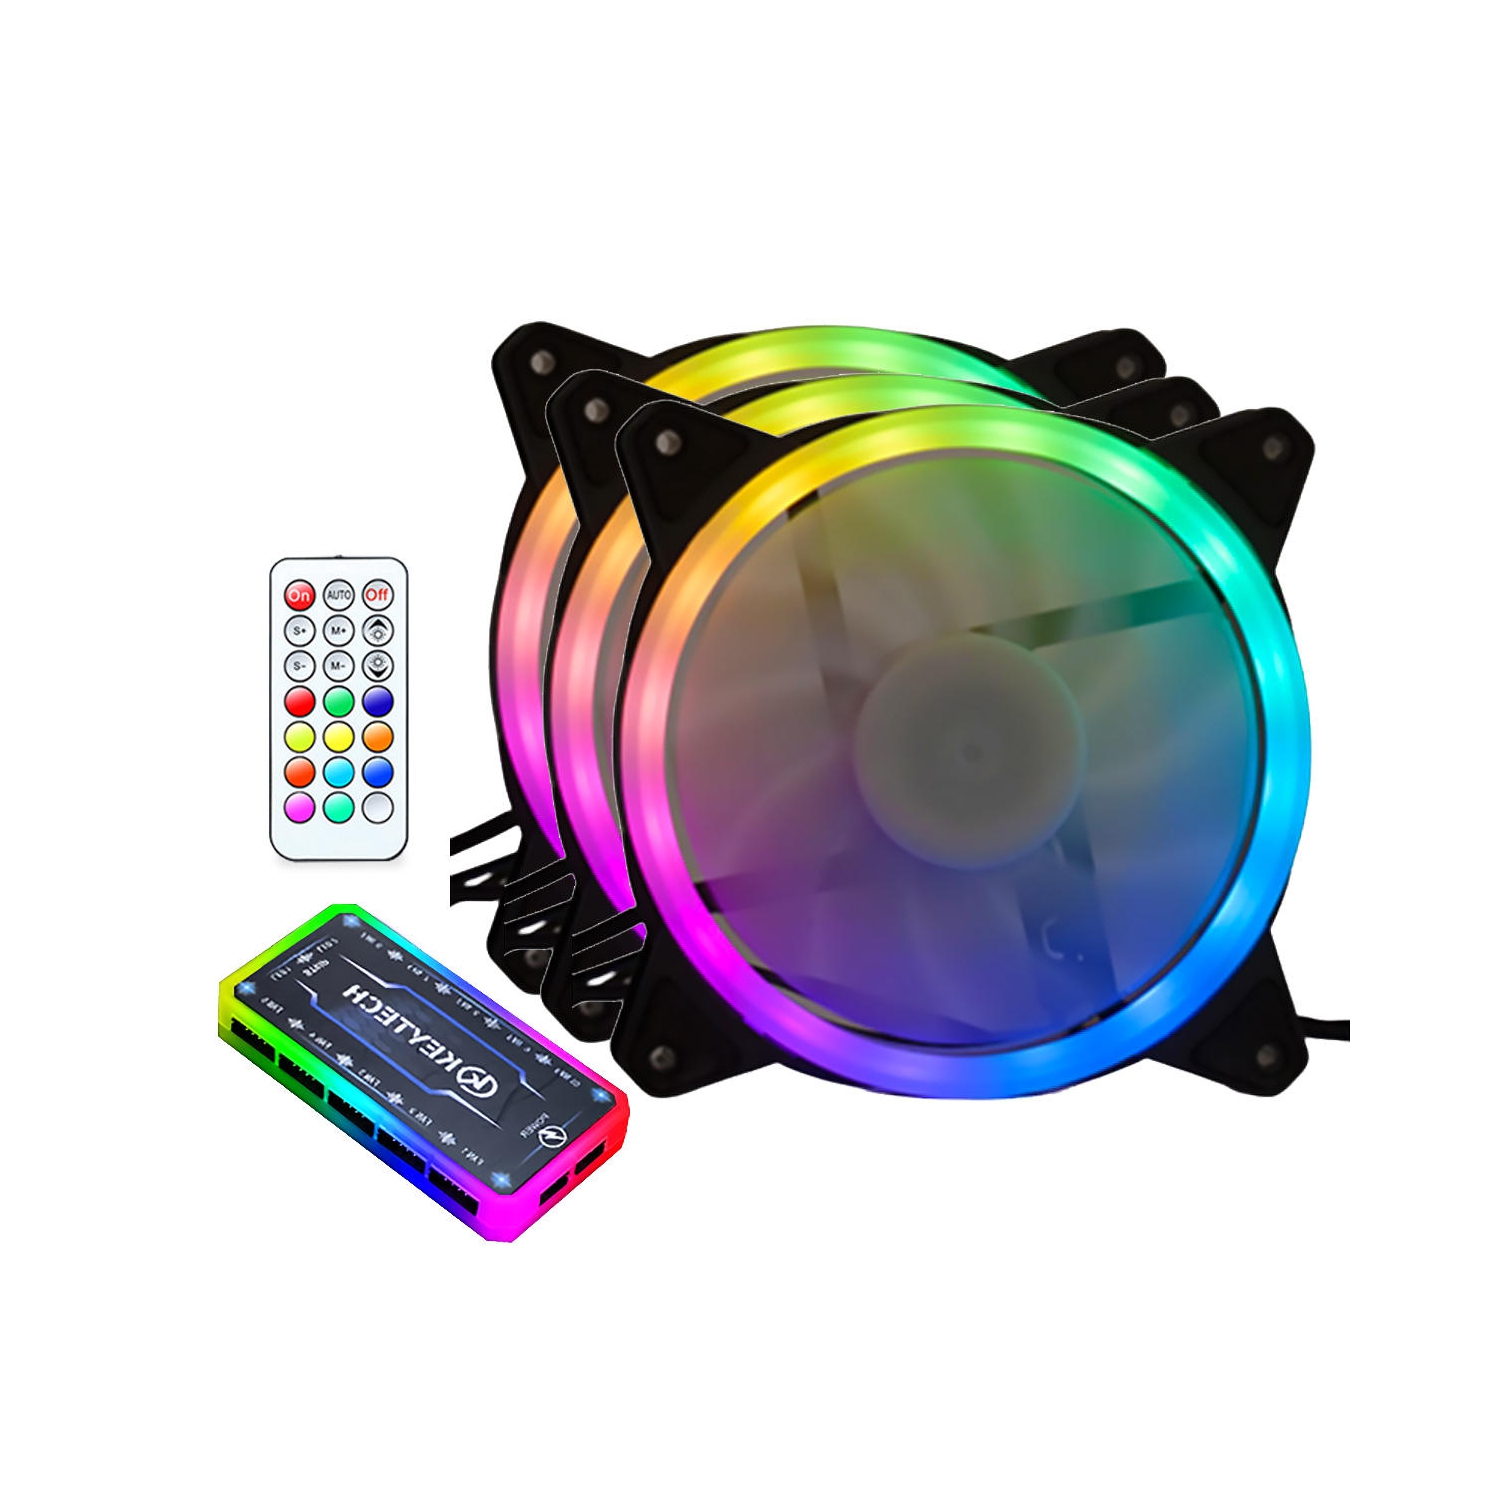 3 x Cooling Fan RGB Computer Case Cooling Fans for Gaming PC, Laptop Cooler Pad with Controller, 11-blade fan (120mm Dia)